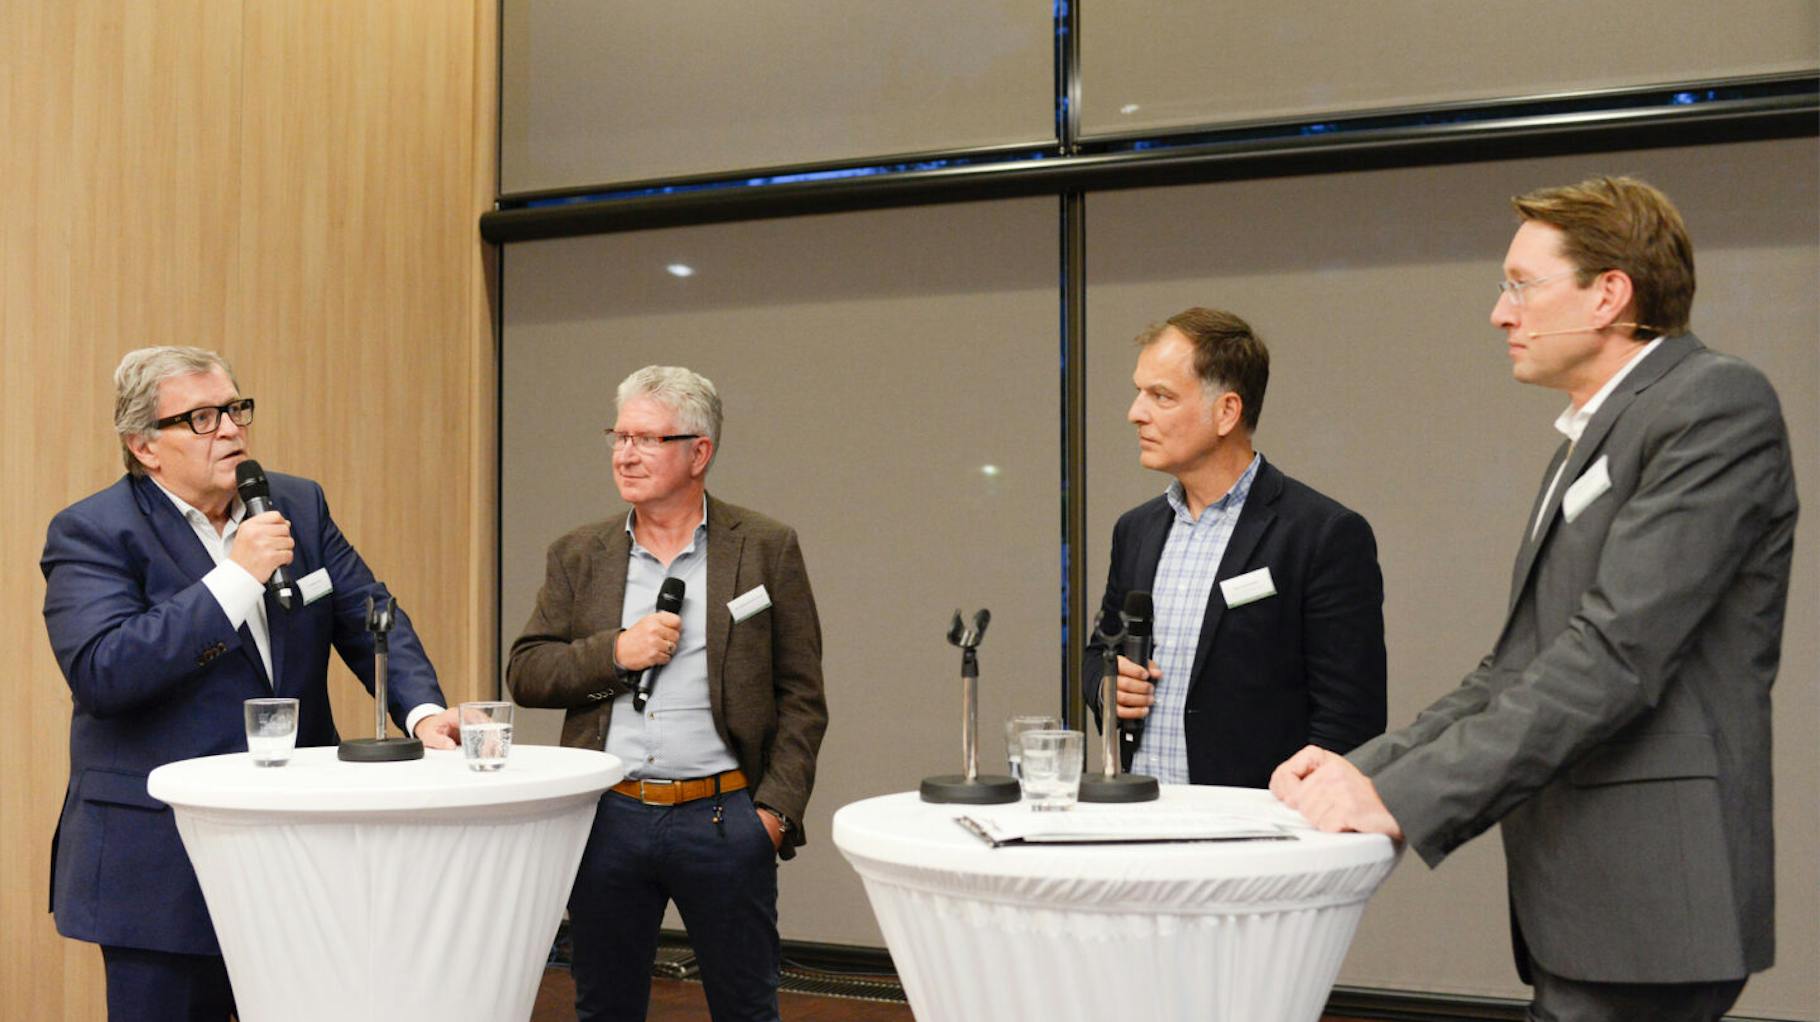 Interesting round table discussion on topics such as eMobility, energy system transformation, digitalisation and shortage of skilled workers (from left to right): Norbert Haug (former head of motor sports at Mercedes Benz), entrepreneur Dr. Edwin Tscheschlok, Ralf Holighaus (Managing Director of glider manufacturer Schempp-Hirth) and moderator Markus Rahner.